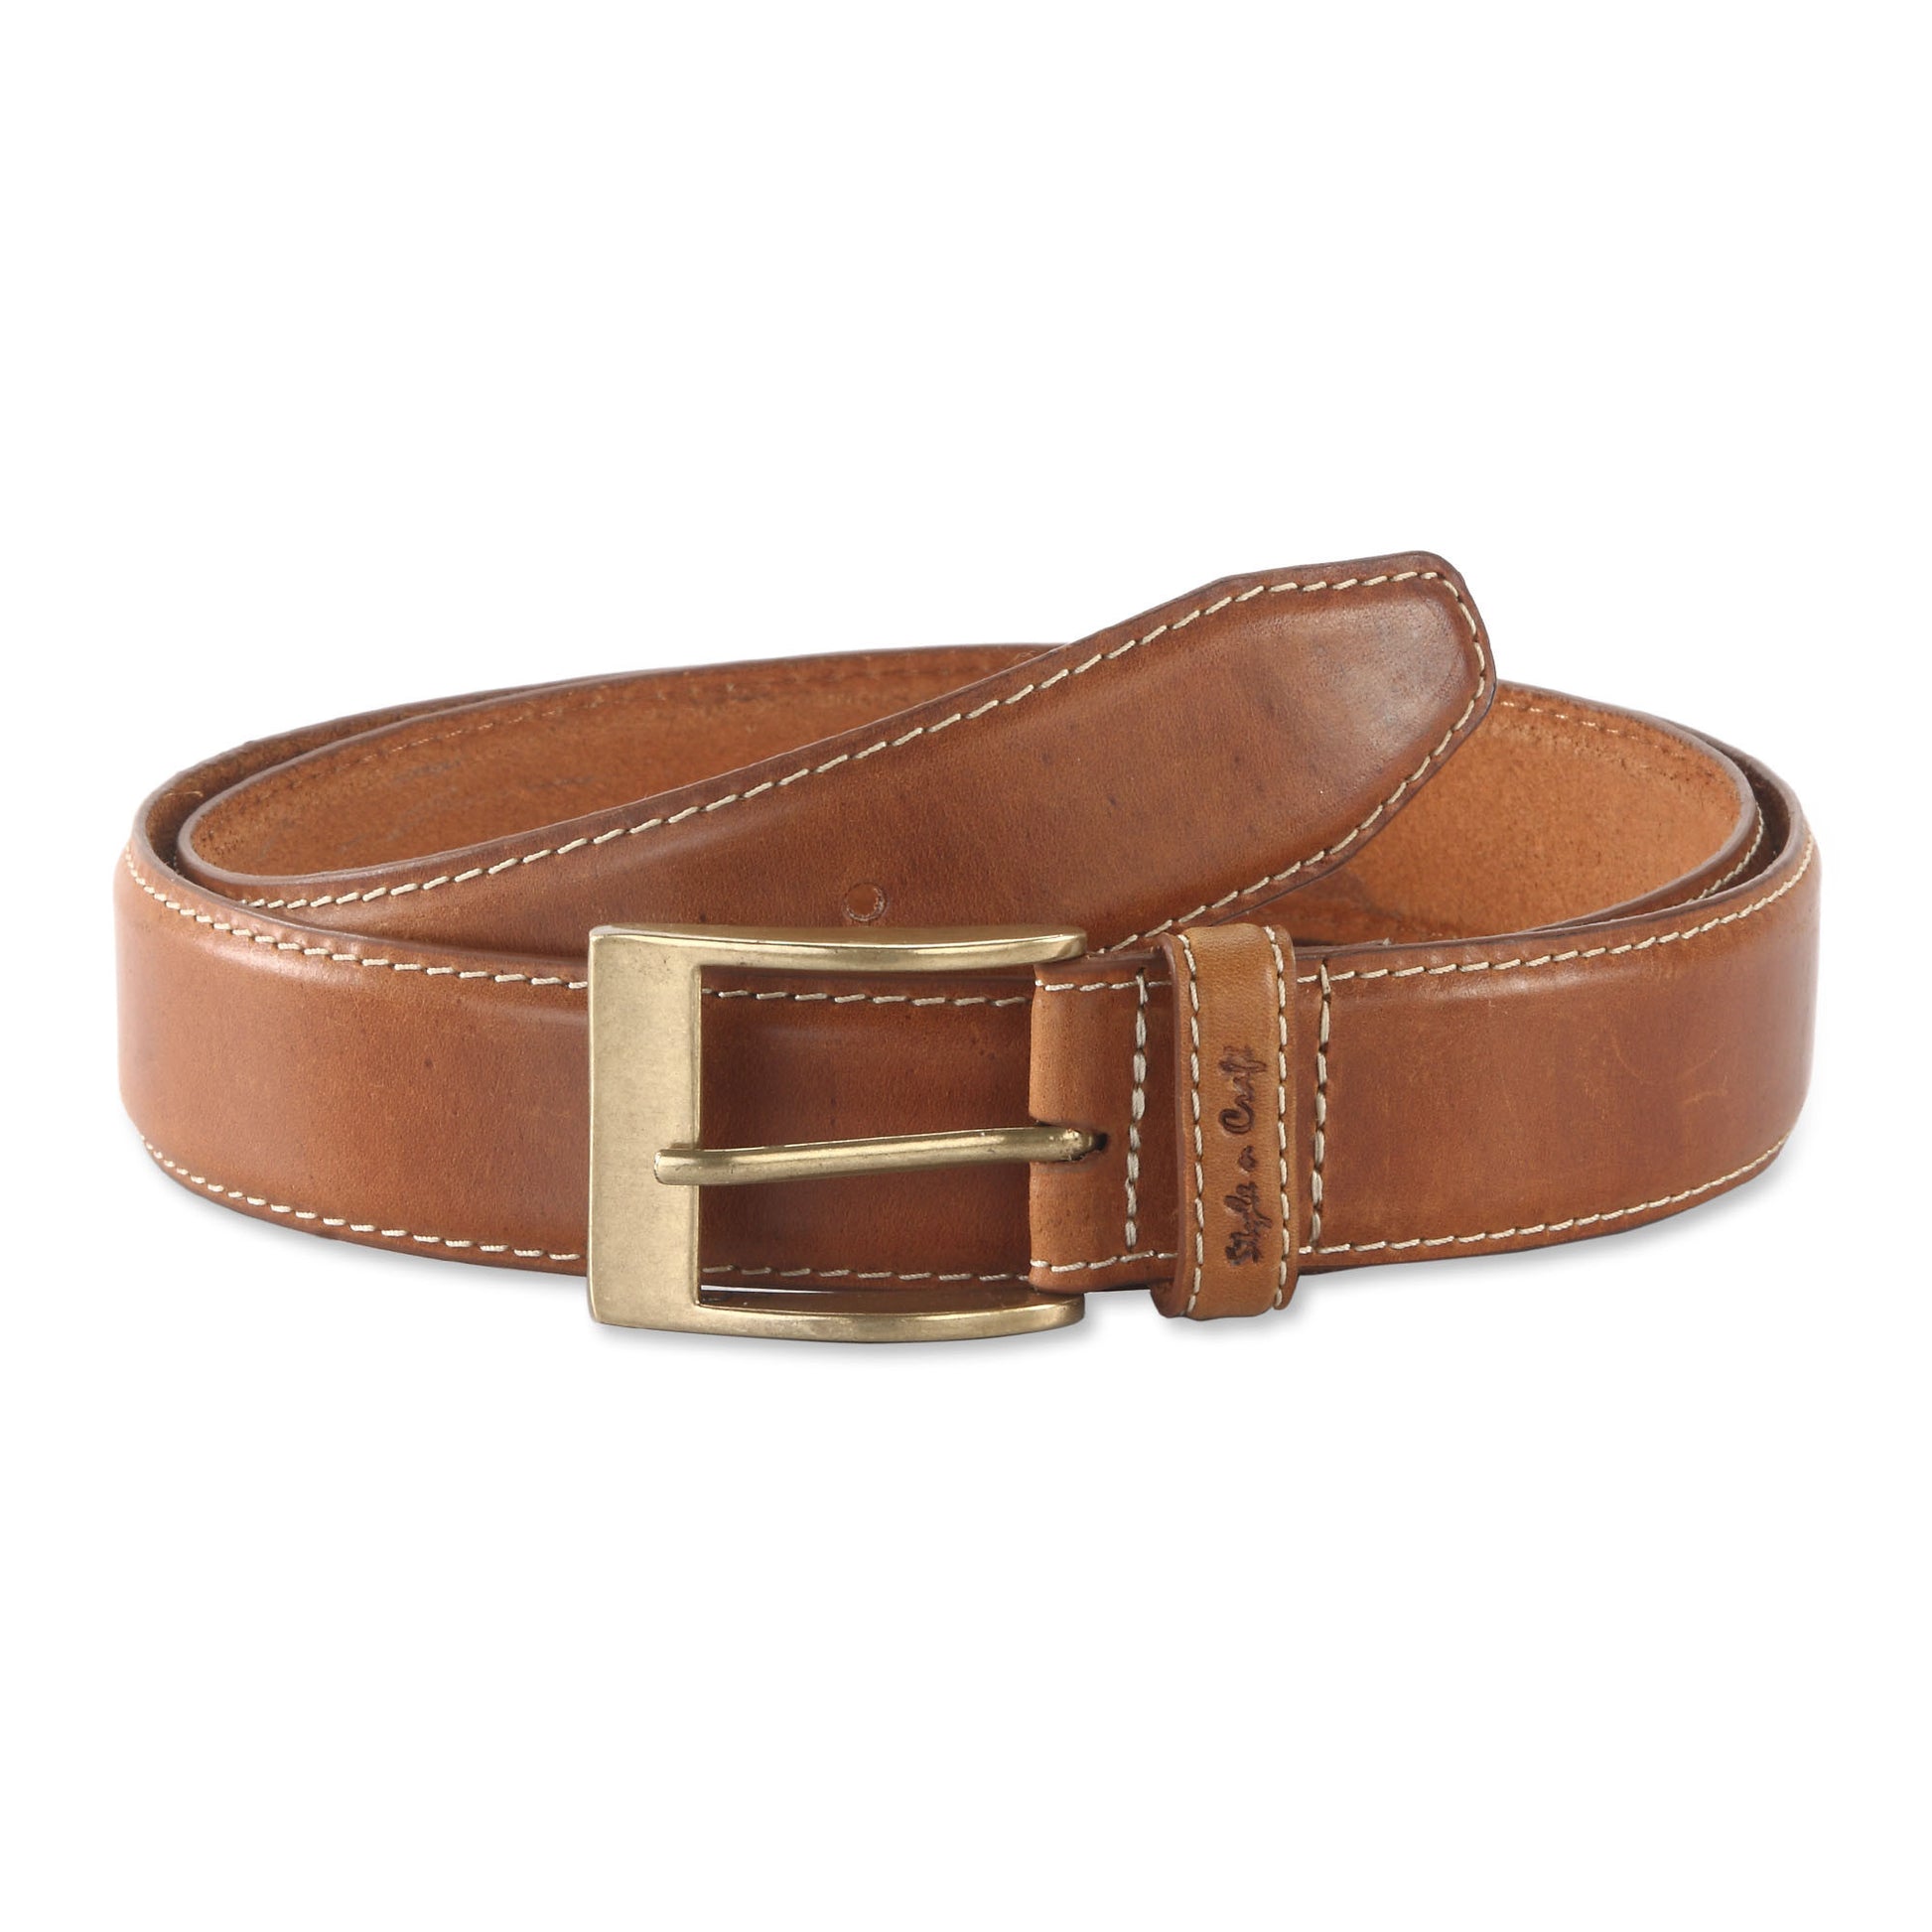 391901 - one and a half inch wide leather belt in tan color top grain leather - front view